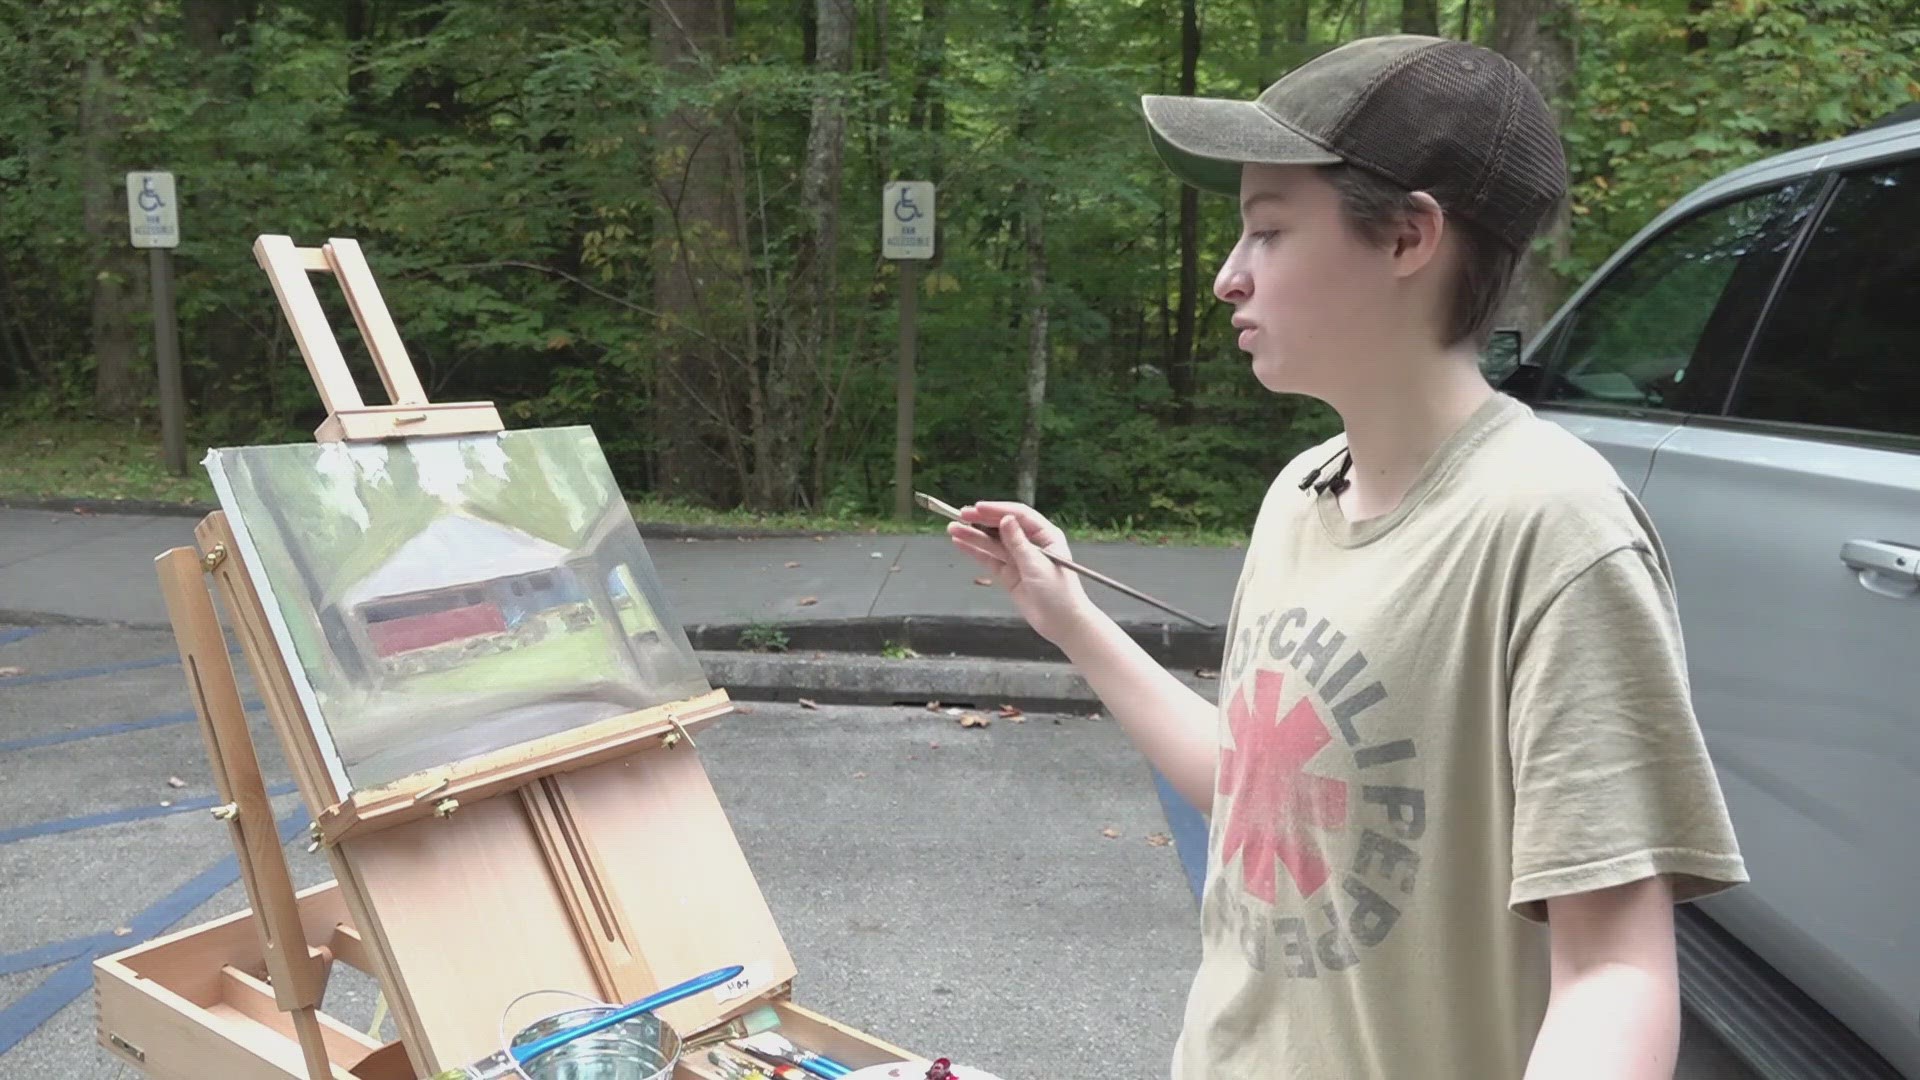 Artists from across the nation will flock to the Great Smoky Mountains to capture its beauty on canvas.